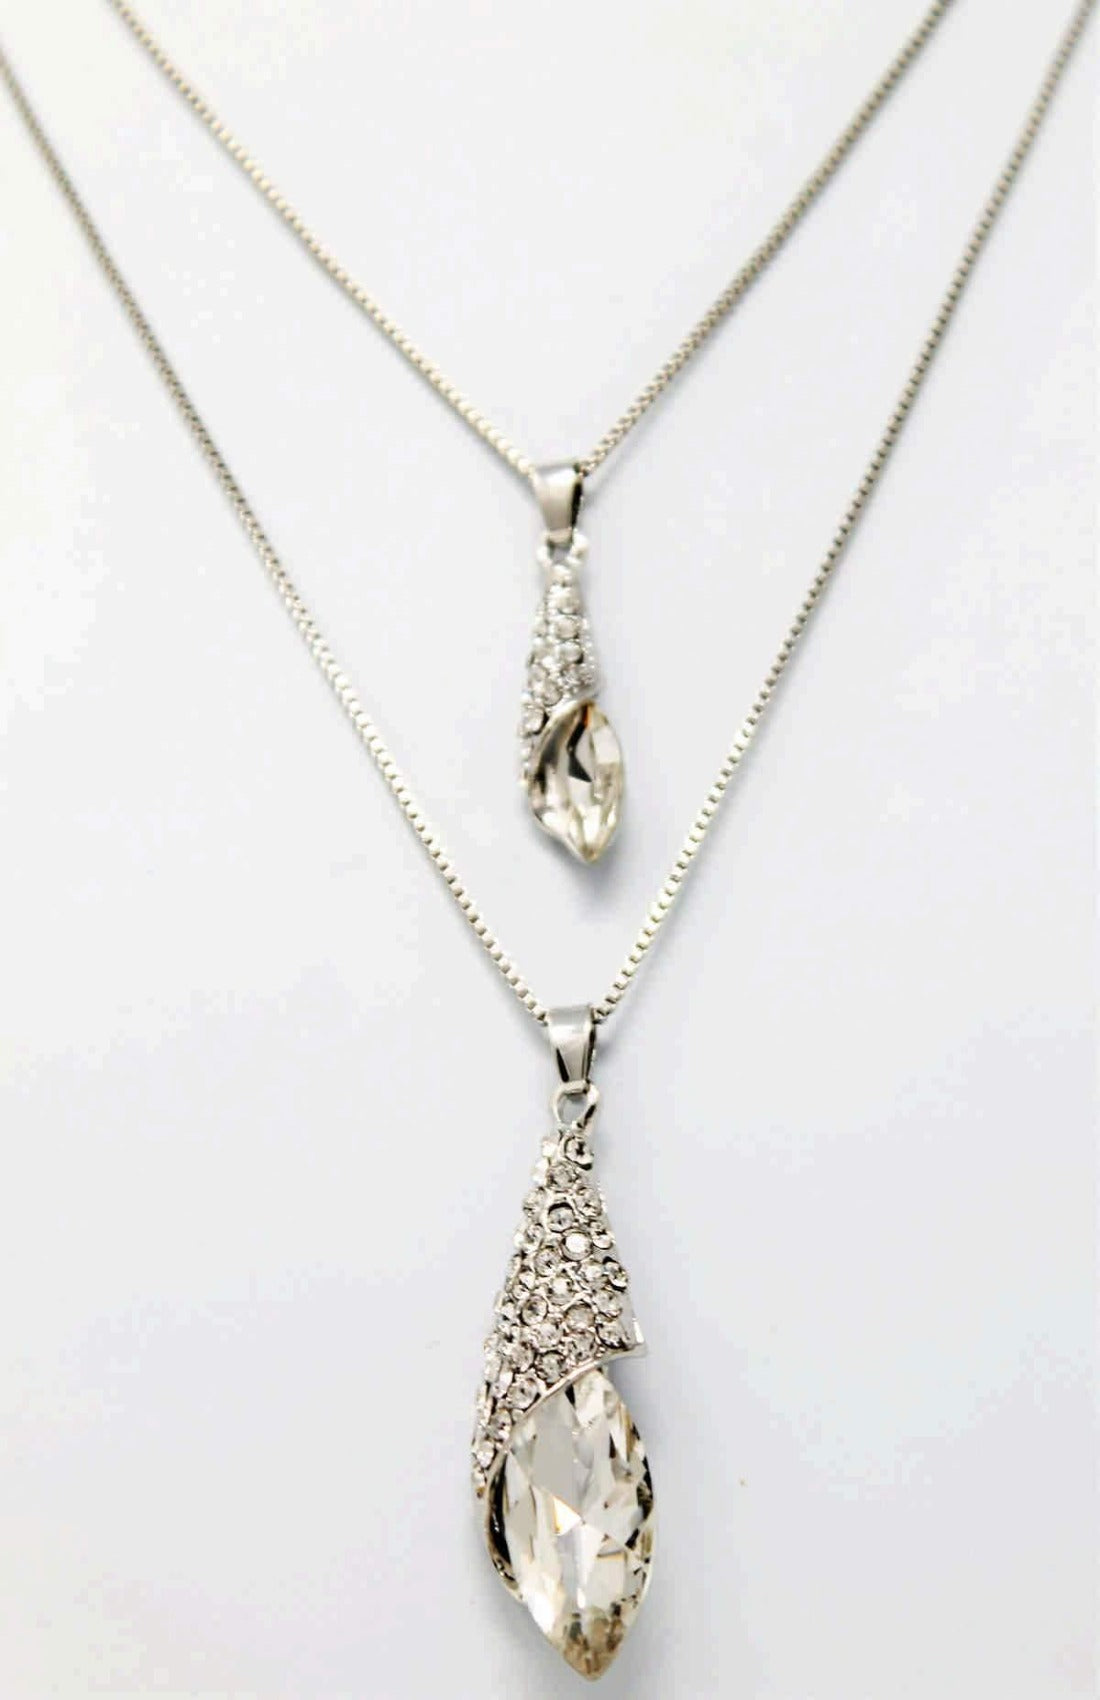 Drop Style Rhinestones Studded Design Imitation Fashion Metal Double Pendant with Long Chain